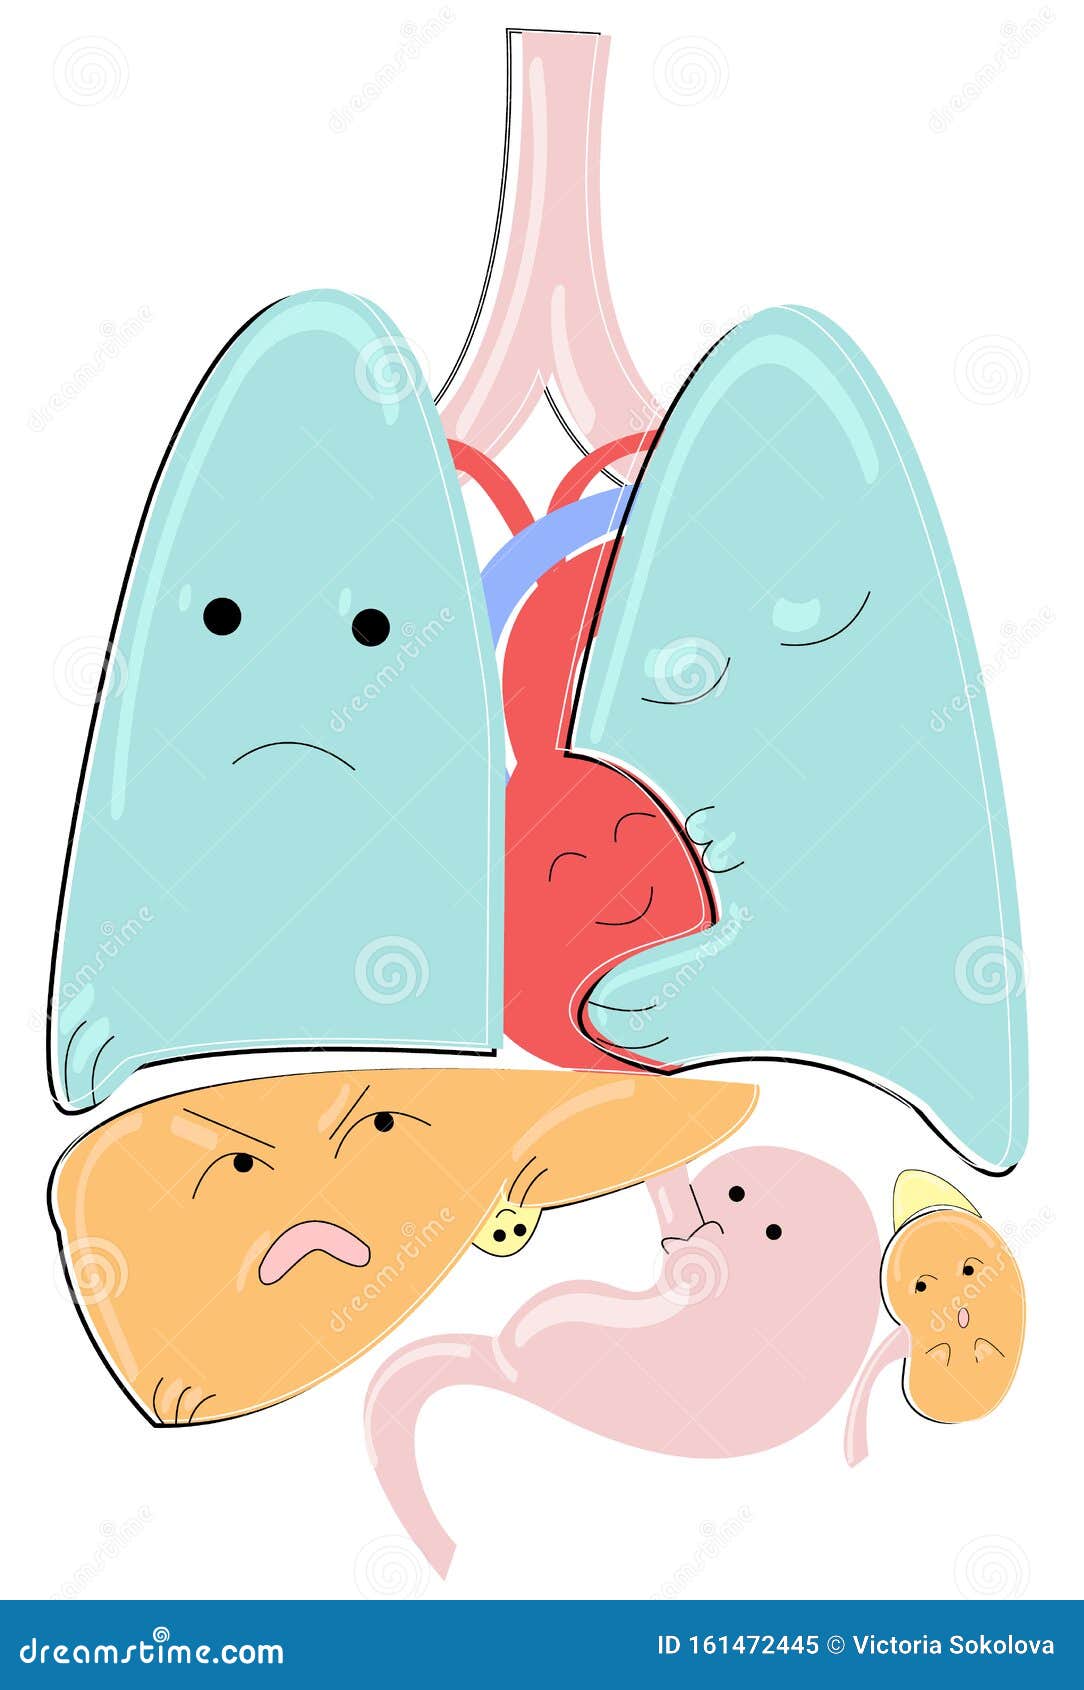   of  cartoon anatomical animated organs such as lungs, heart, stomach, liver with gallbladder